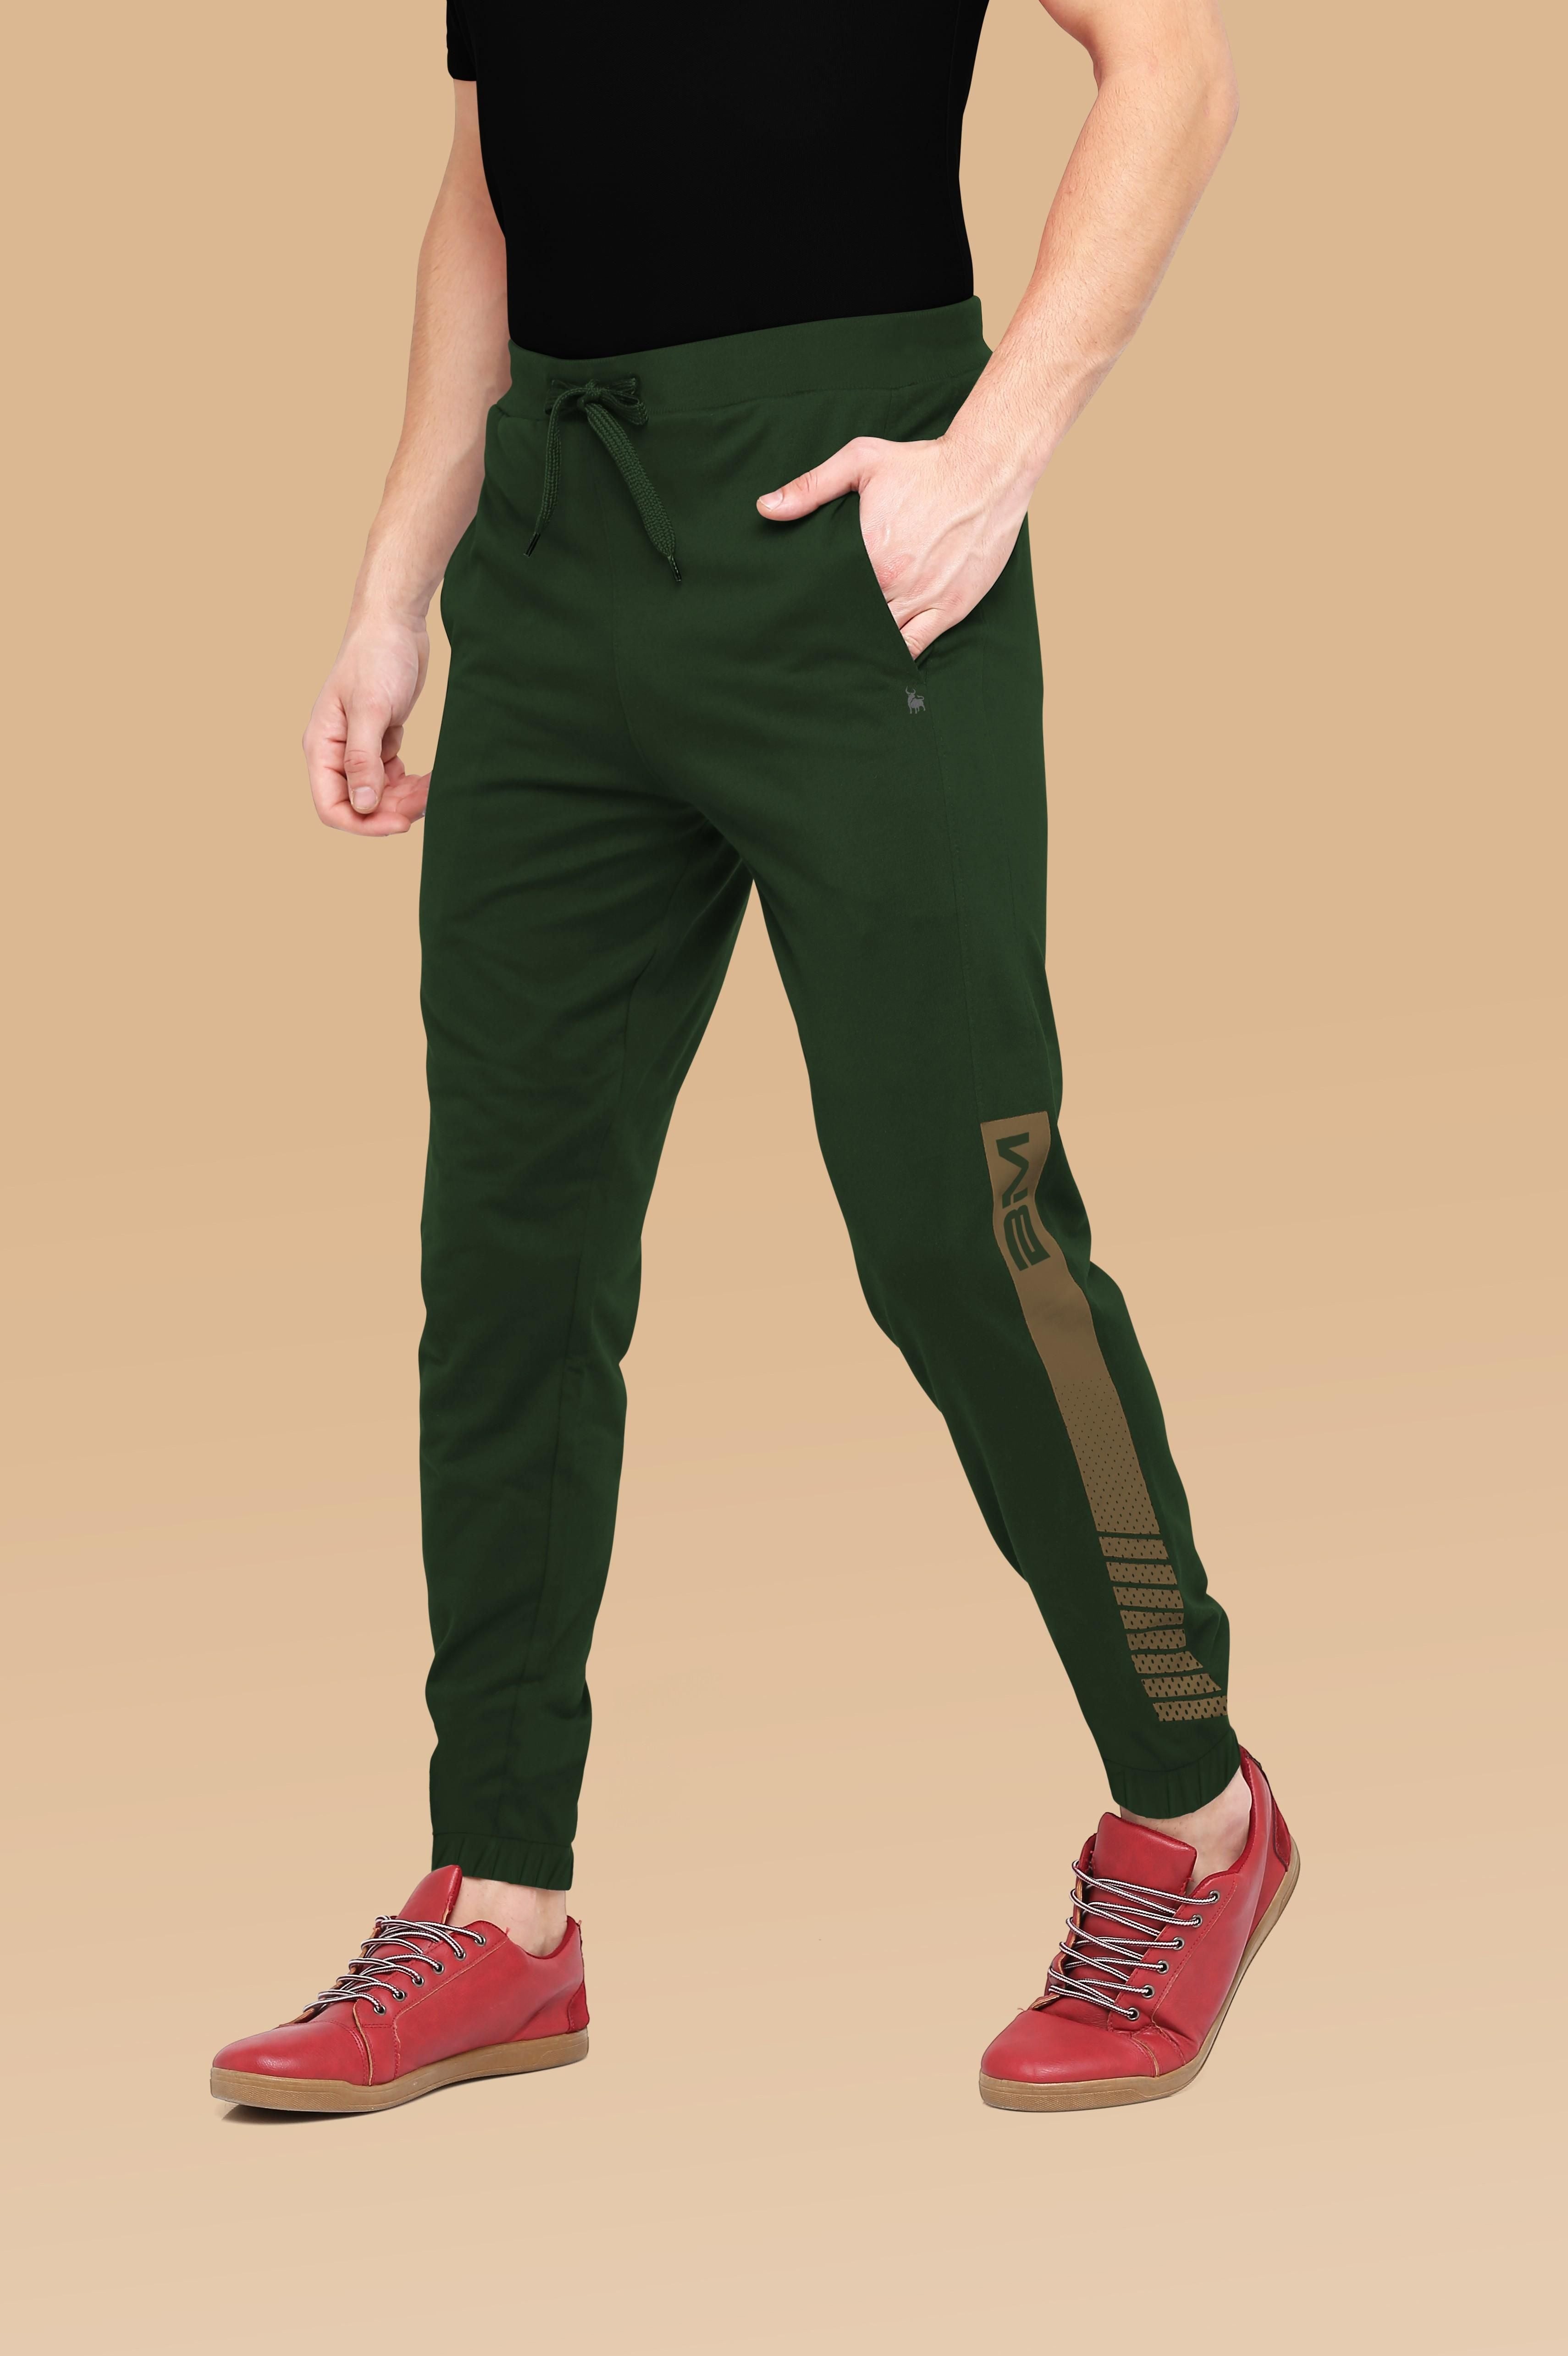 Amazon - Buy Puma Men's Polyester Track Pants for Rs.719